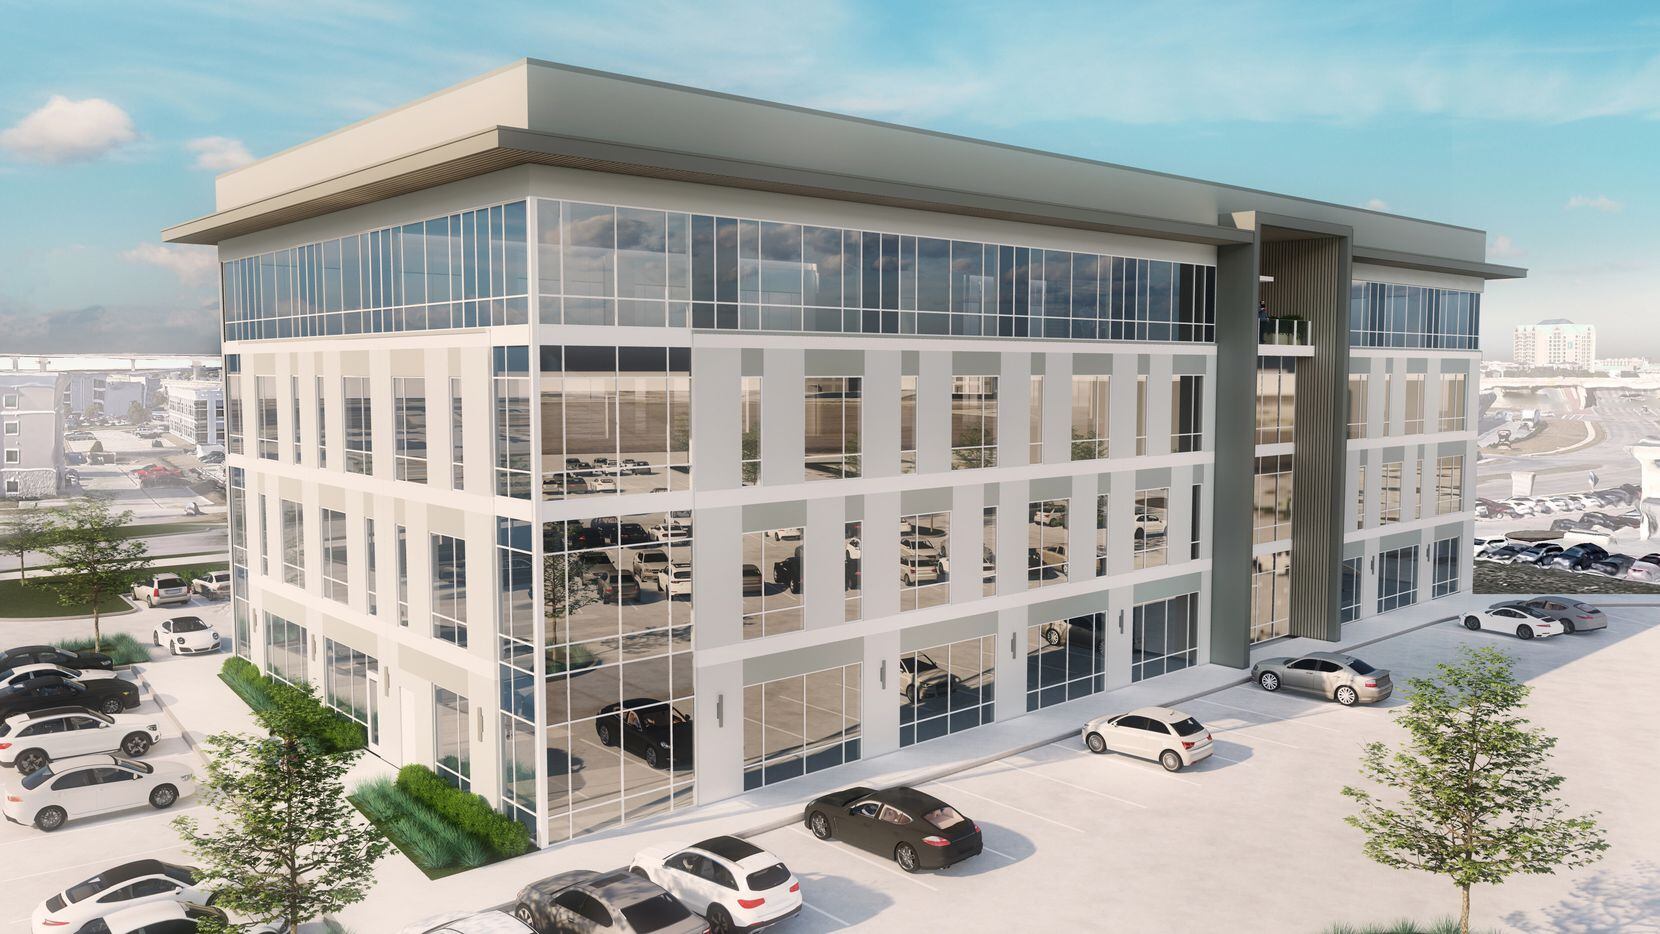 Republic Finance is building a 58,000-square-foot facility at 8428 Parkwood Blvd in Plano...